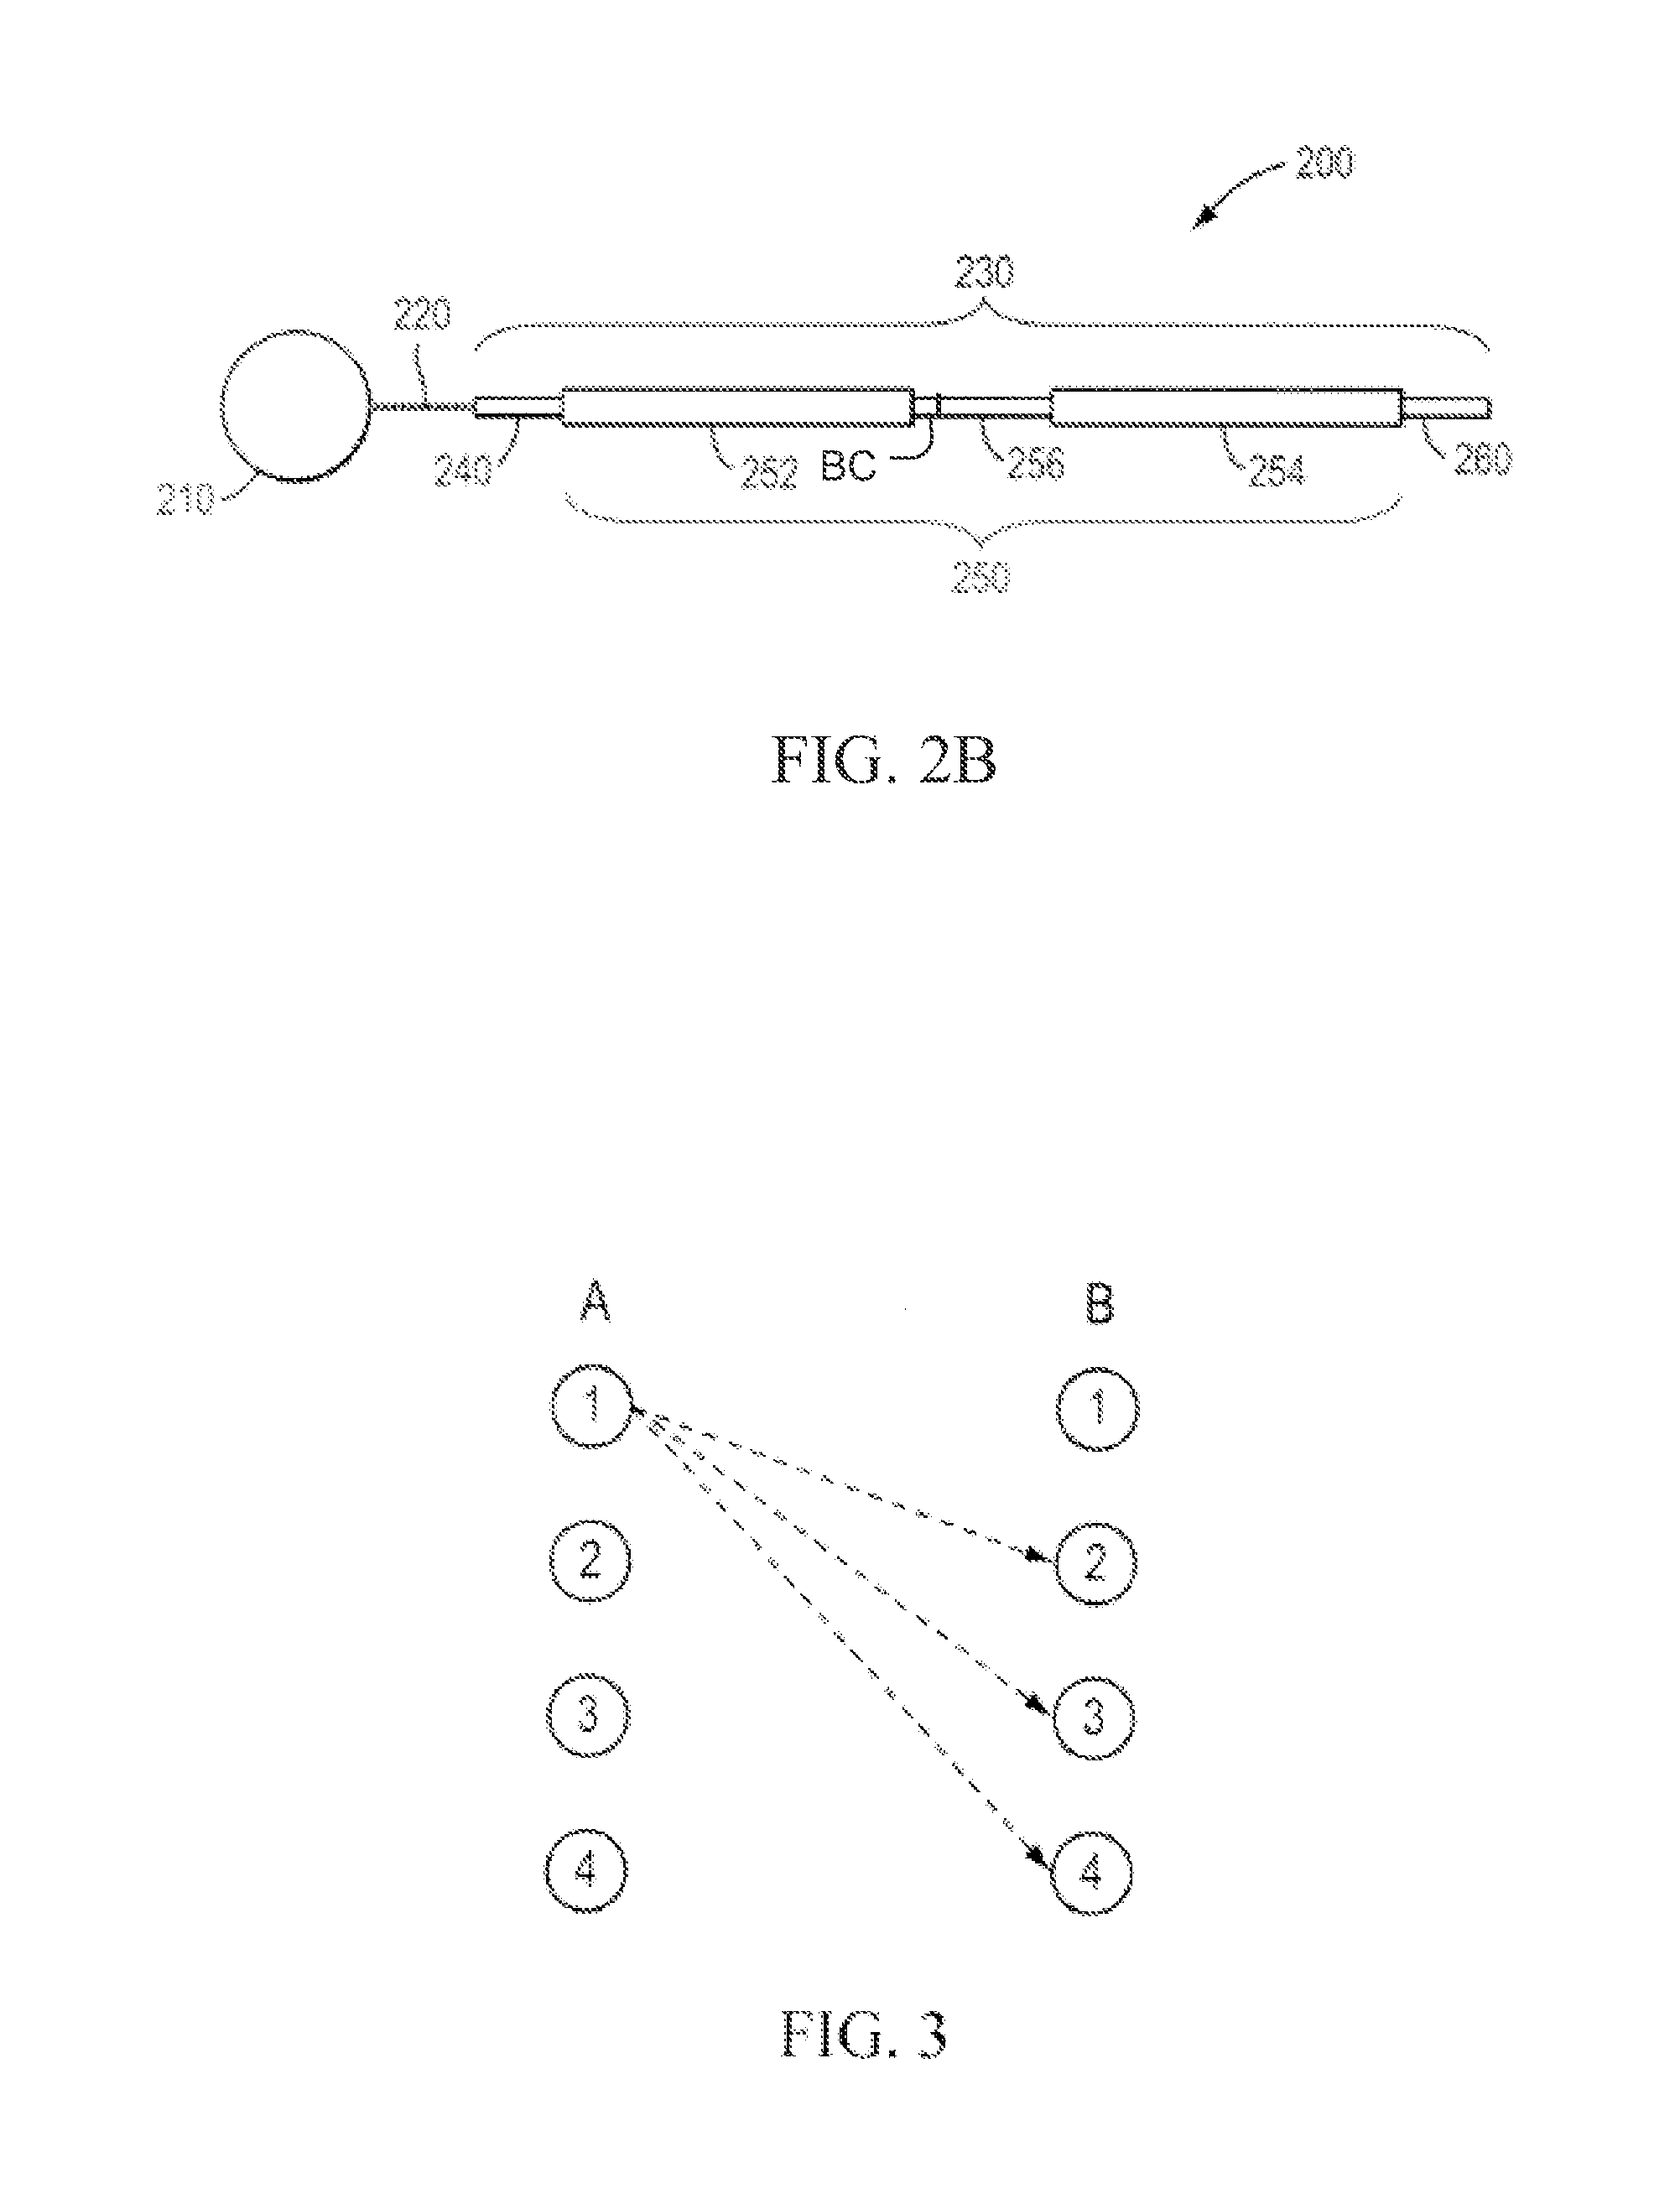 Methods and systems for nucleic acid sequencing validation, calibration and normalization